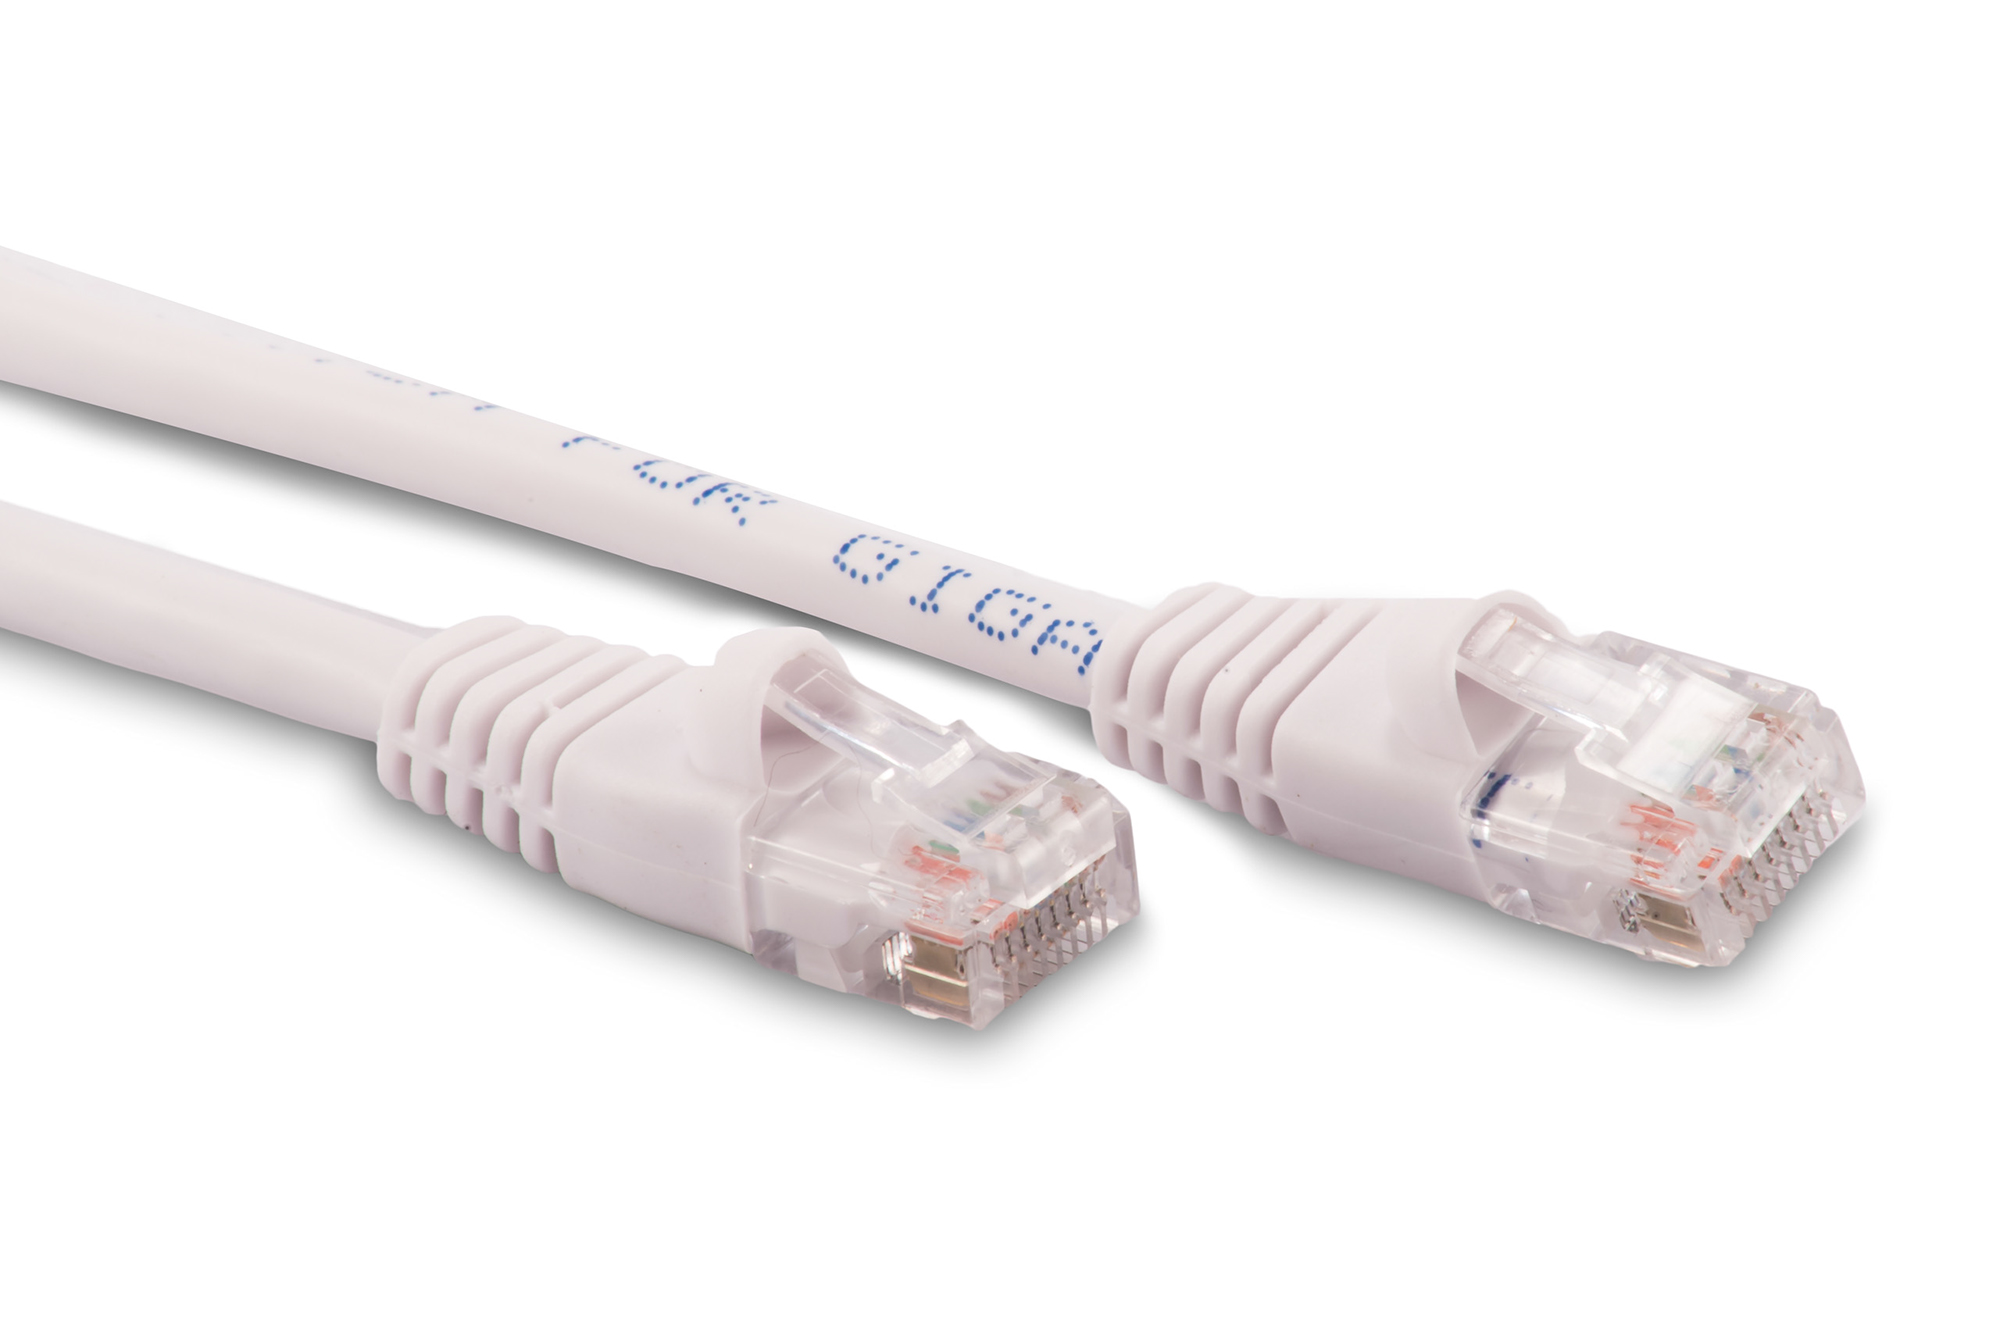 5ft Cat6 Ethernet Patch Cable - White Color - Snagless Boot